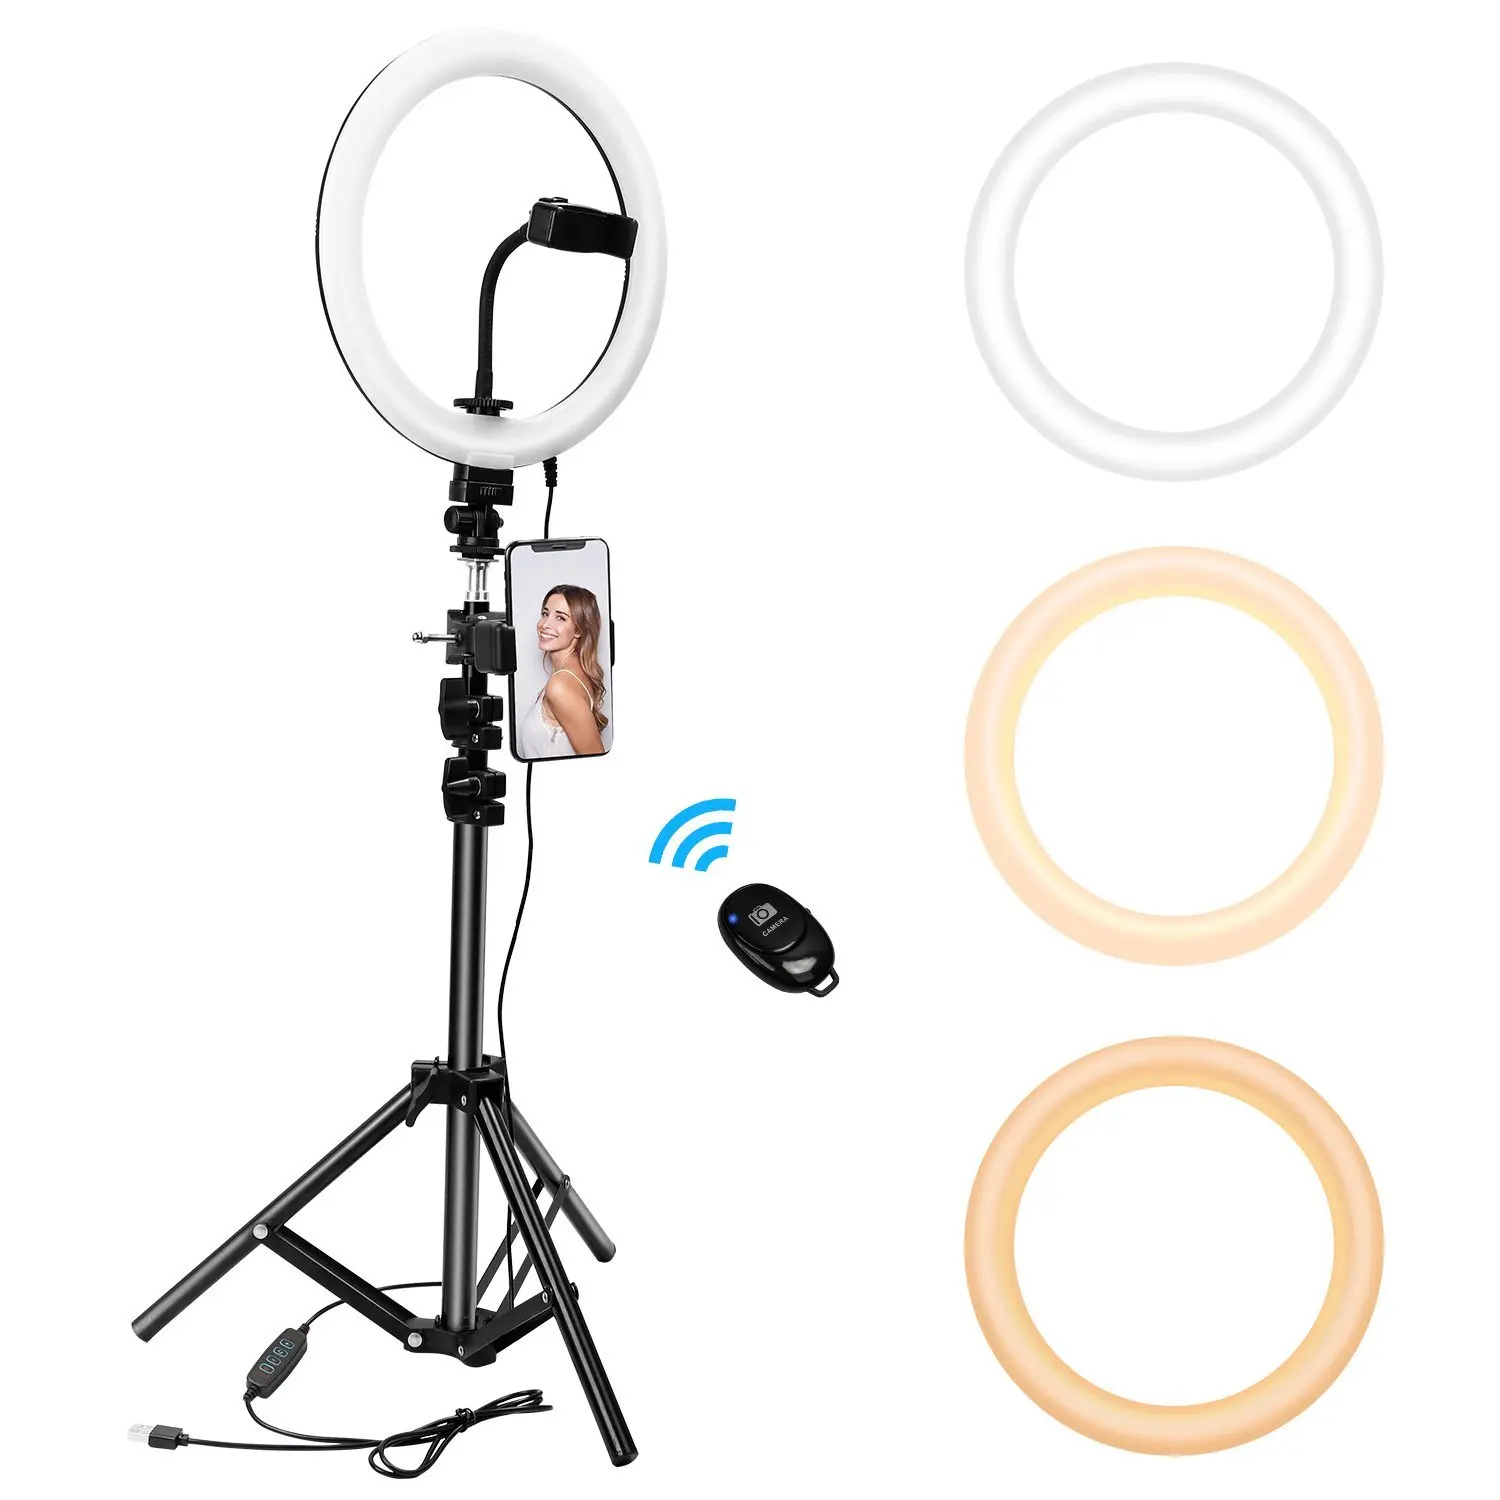 Hot sale 12 inch smd led ring light with tripod stand price